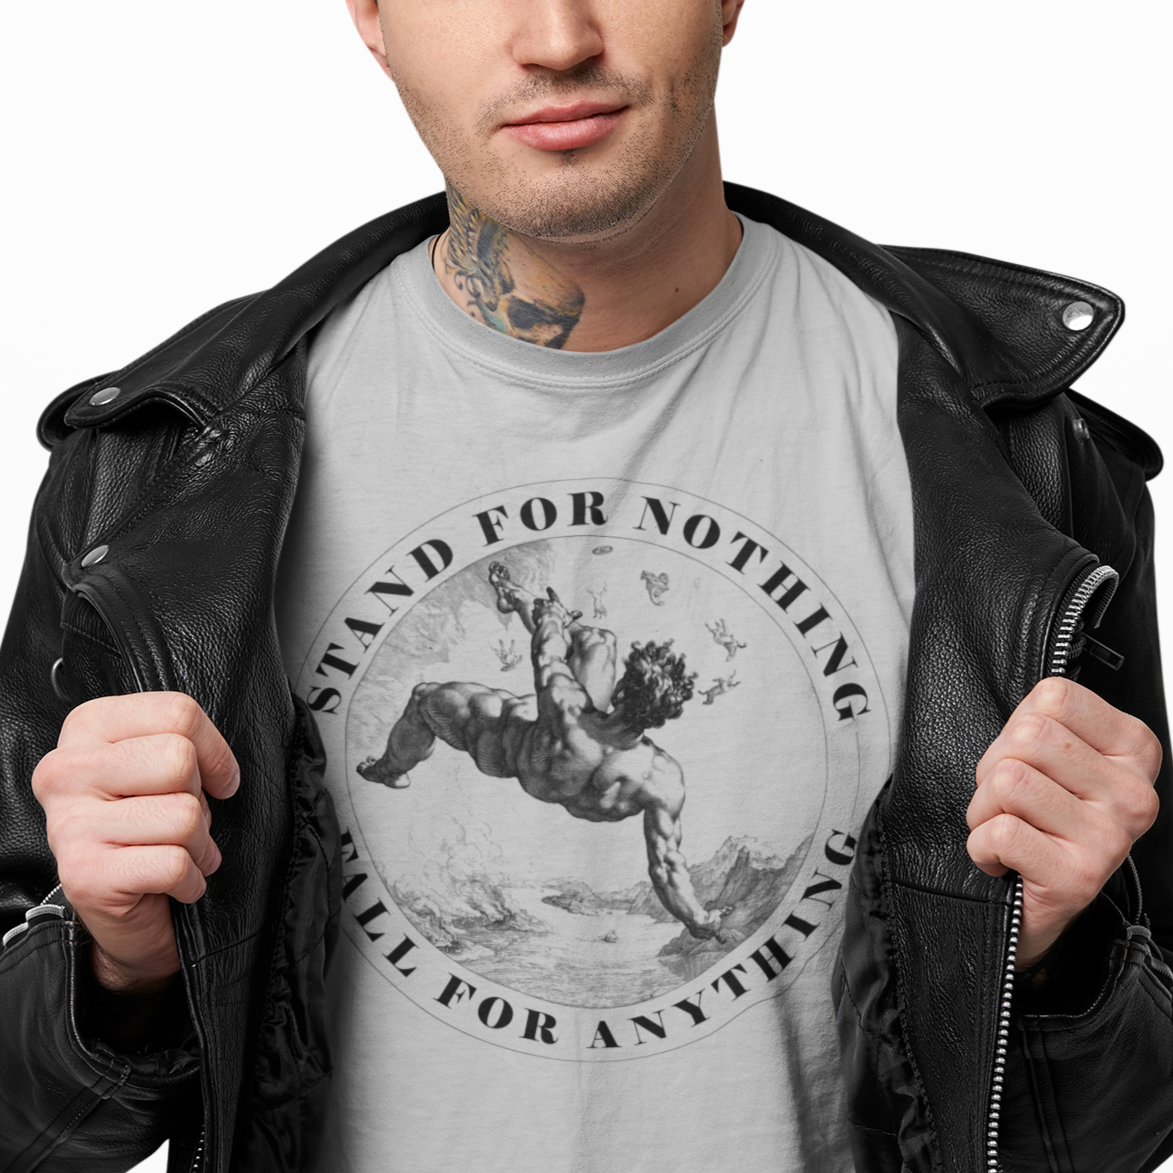 Stand for Nothing Fall For Anything Graphic T-Shirt